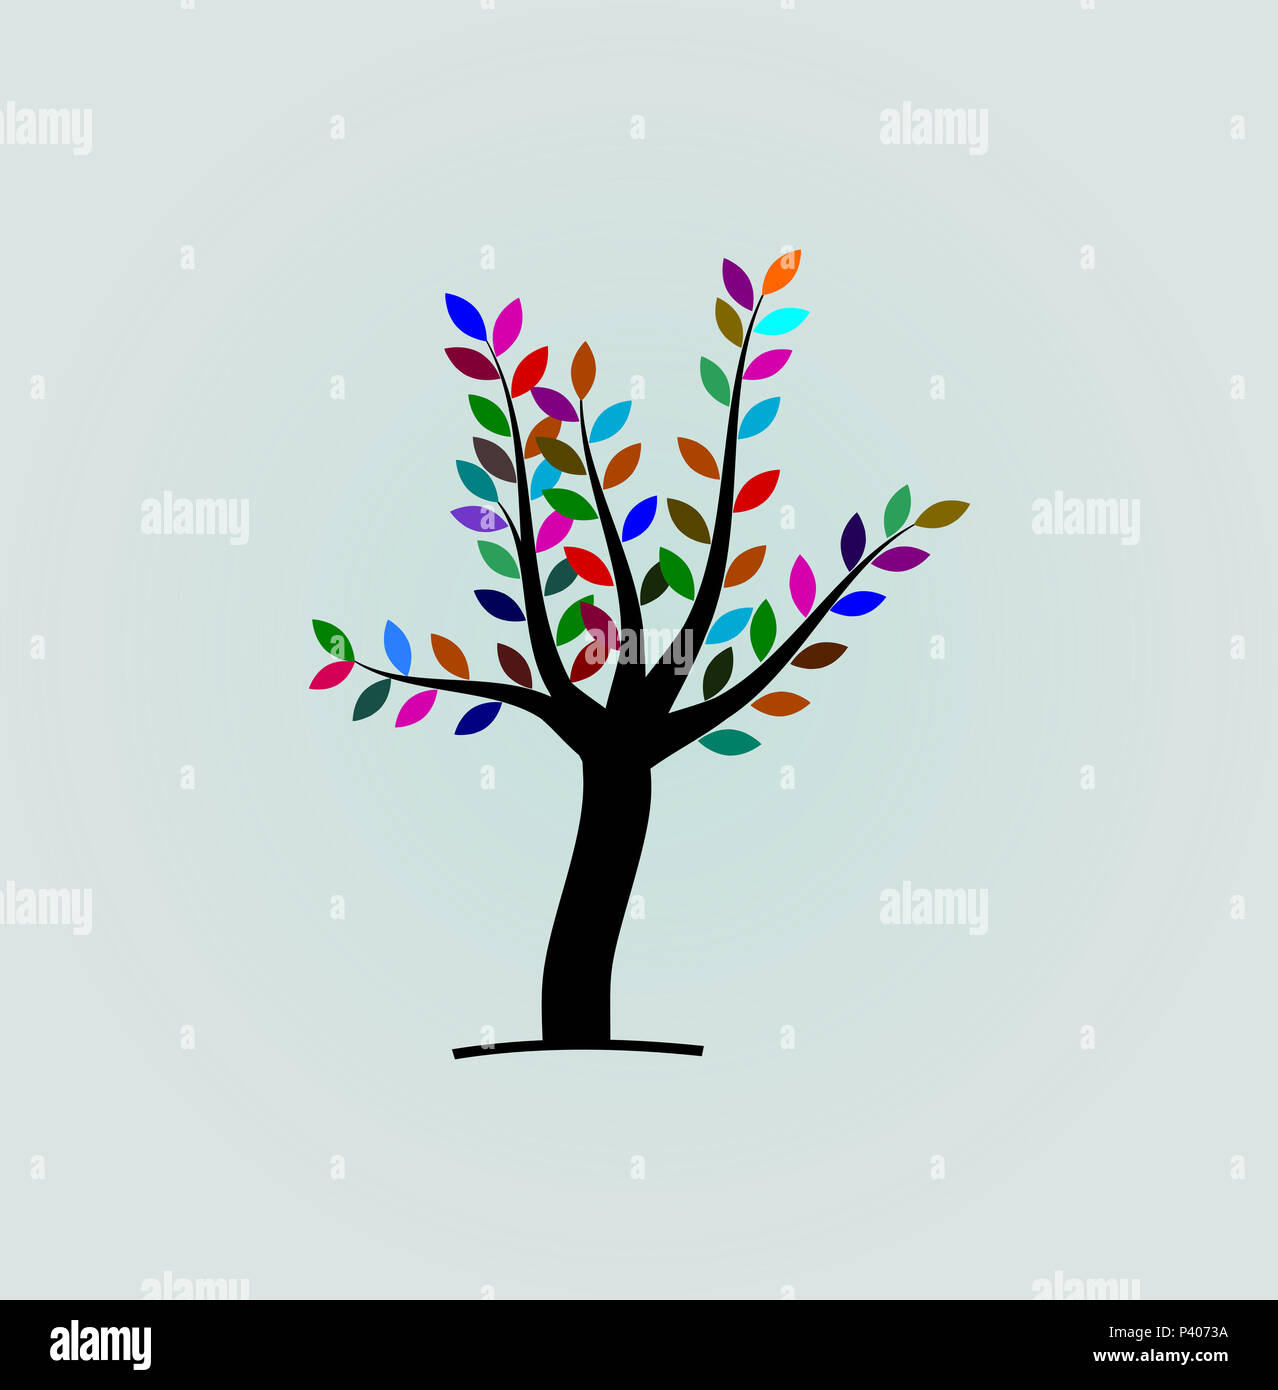 Tree with colorful leaf illustrations Stock Photo